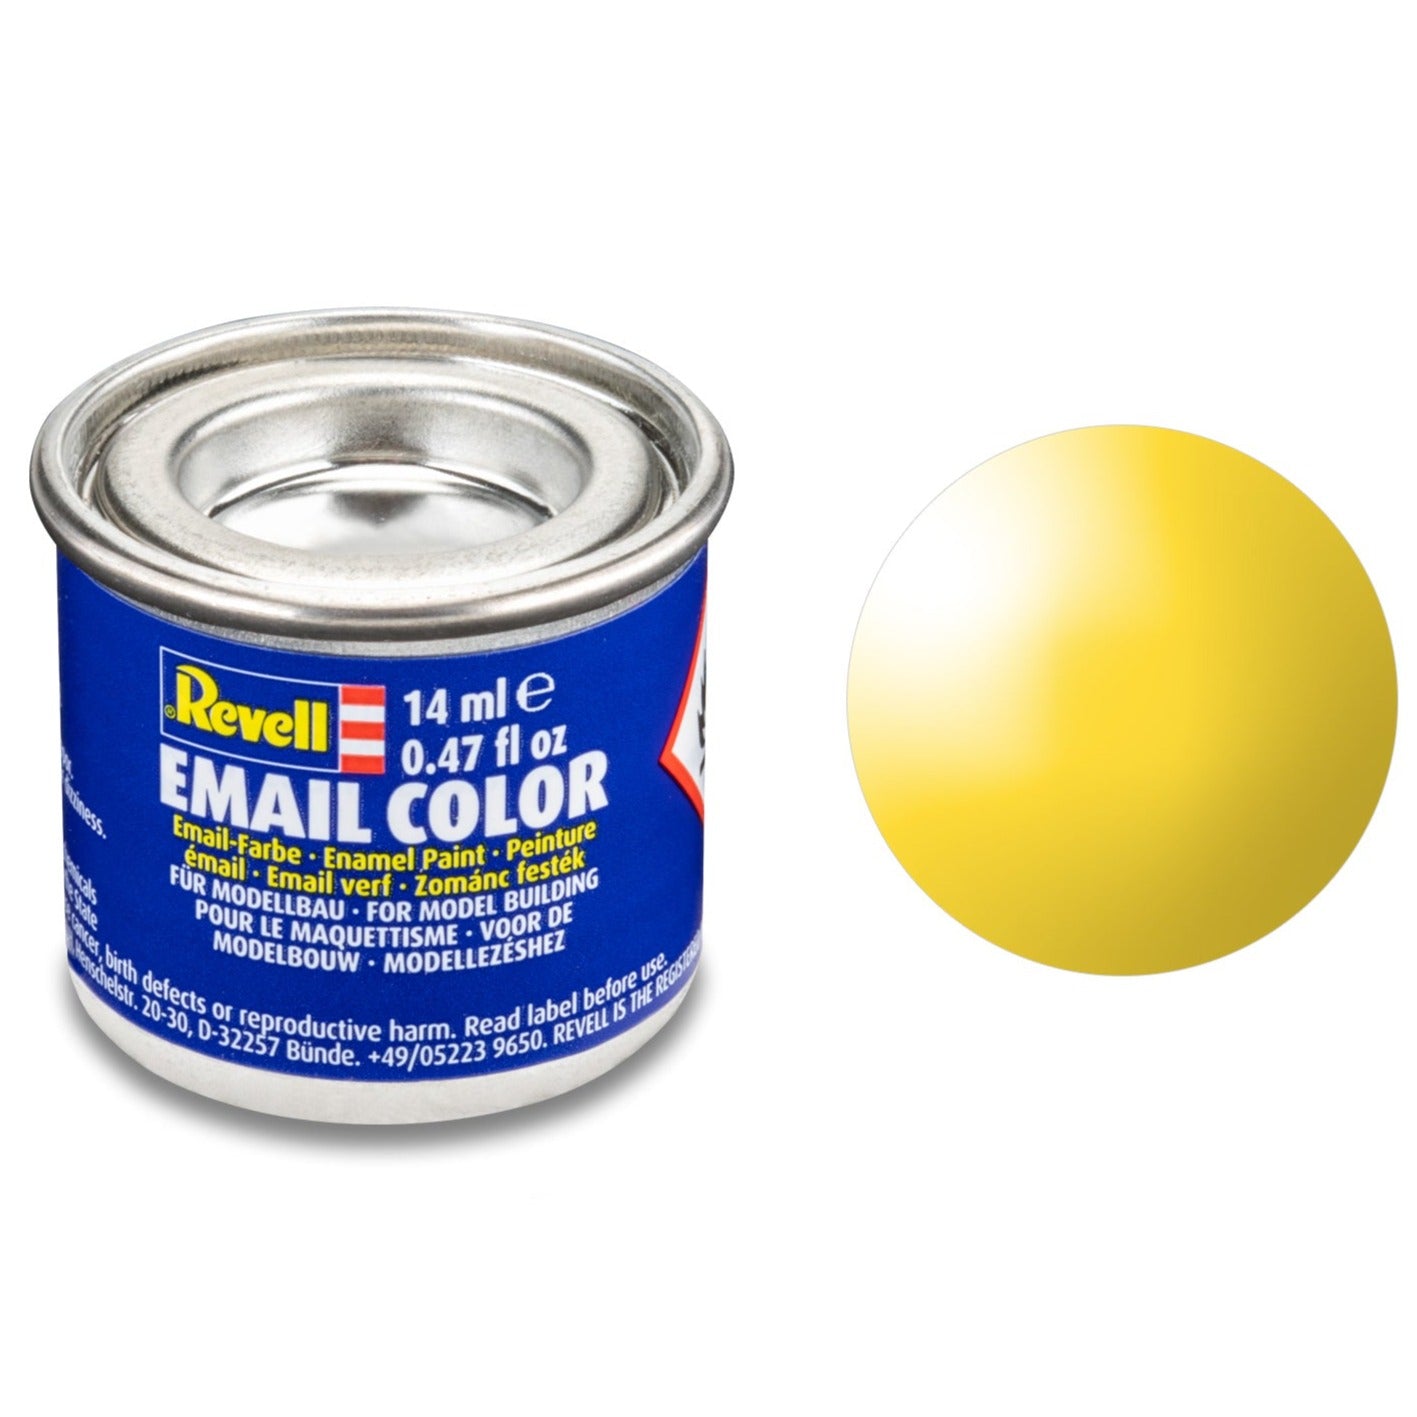 Revell Gloss "Yellow" (RAL 1018) Enamel Paint - 14ml - 32112 - Loaded Dice Barry Vale of Glamorgan CF64 3HD